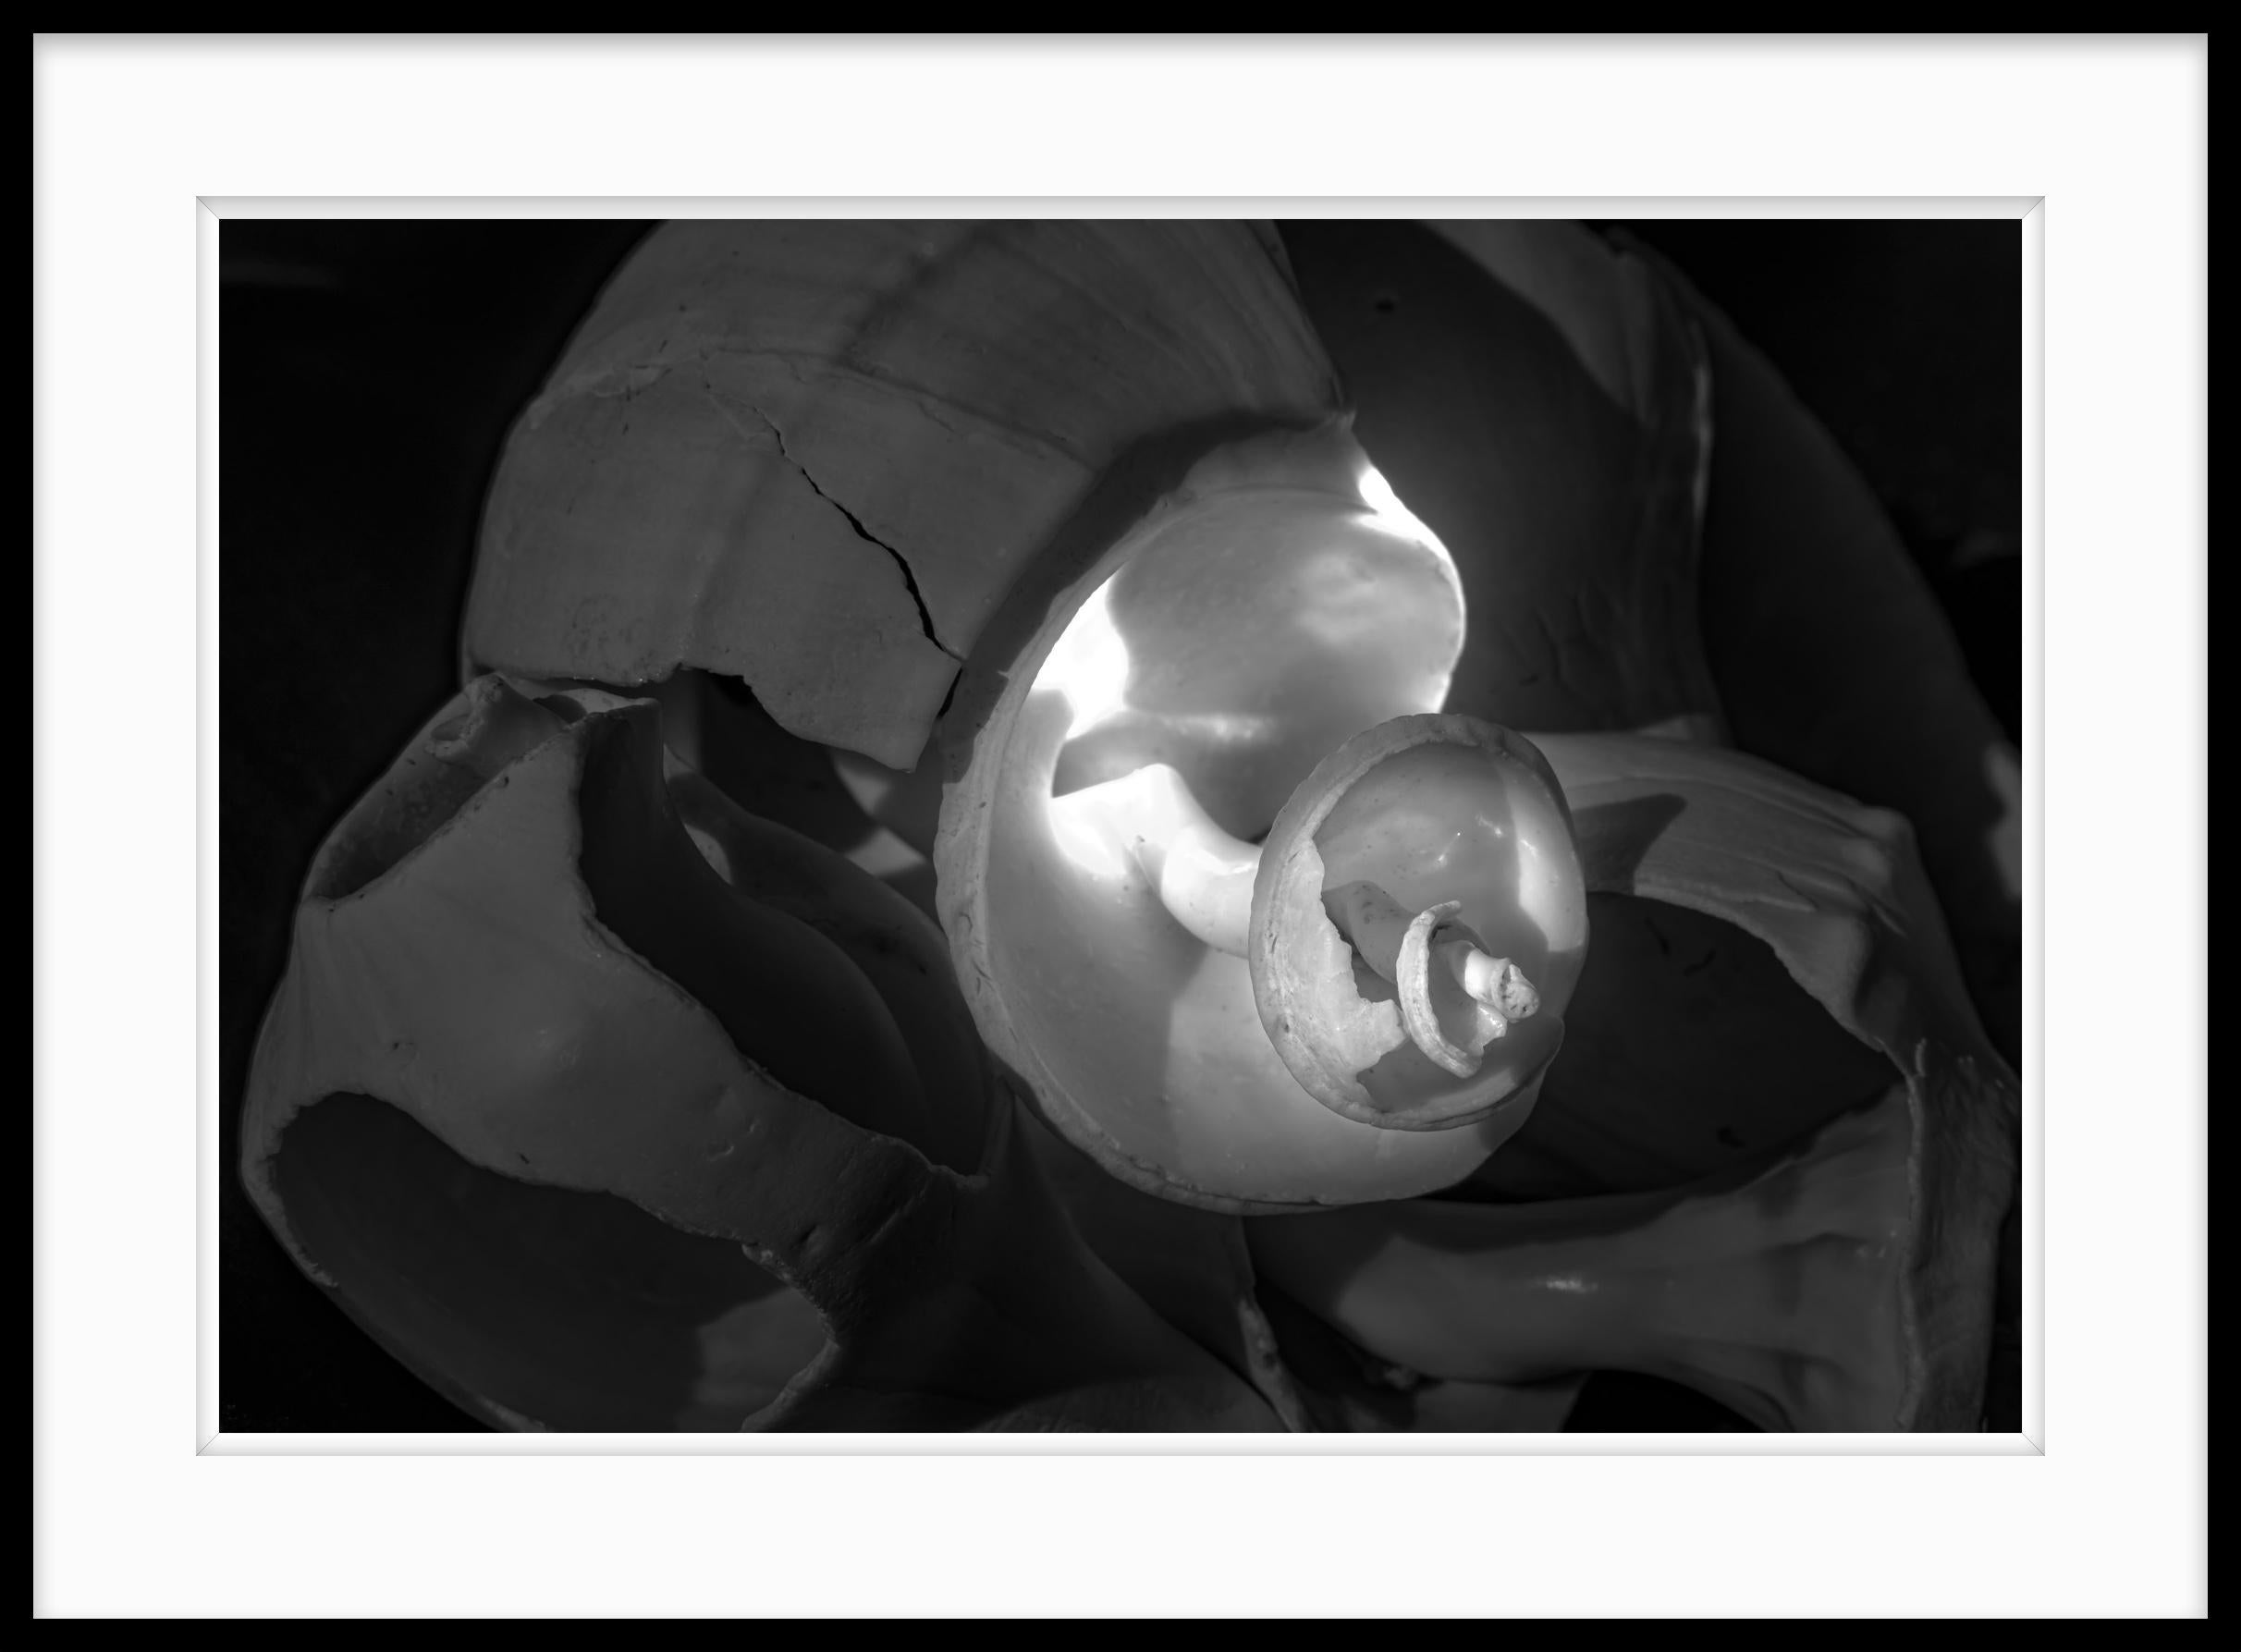 Limited edition still life black and white archival pigment print of these found shells with Lewis' signature lighting style. Title - 